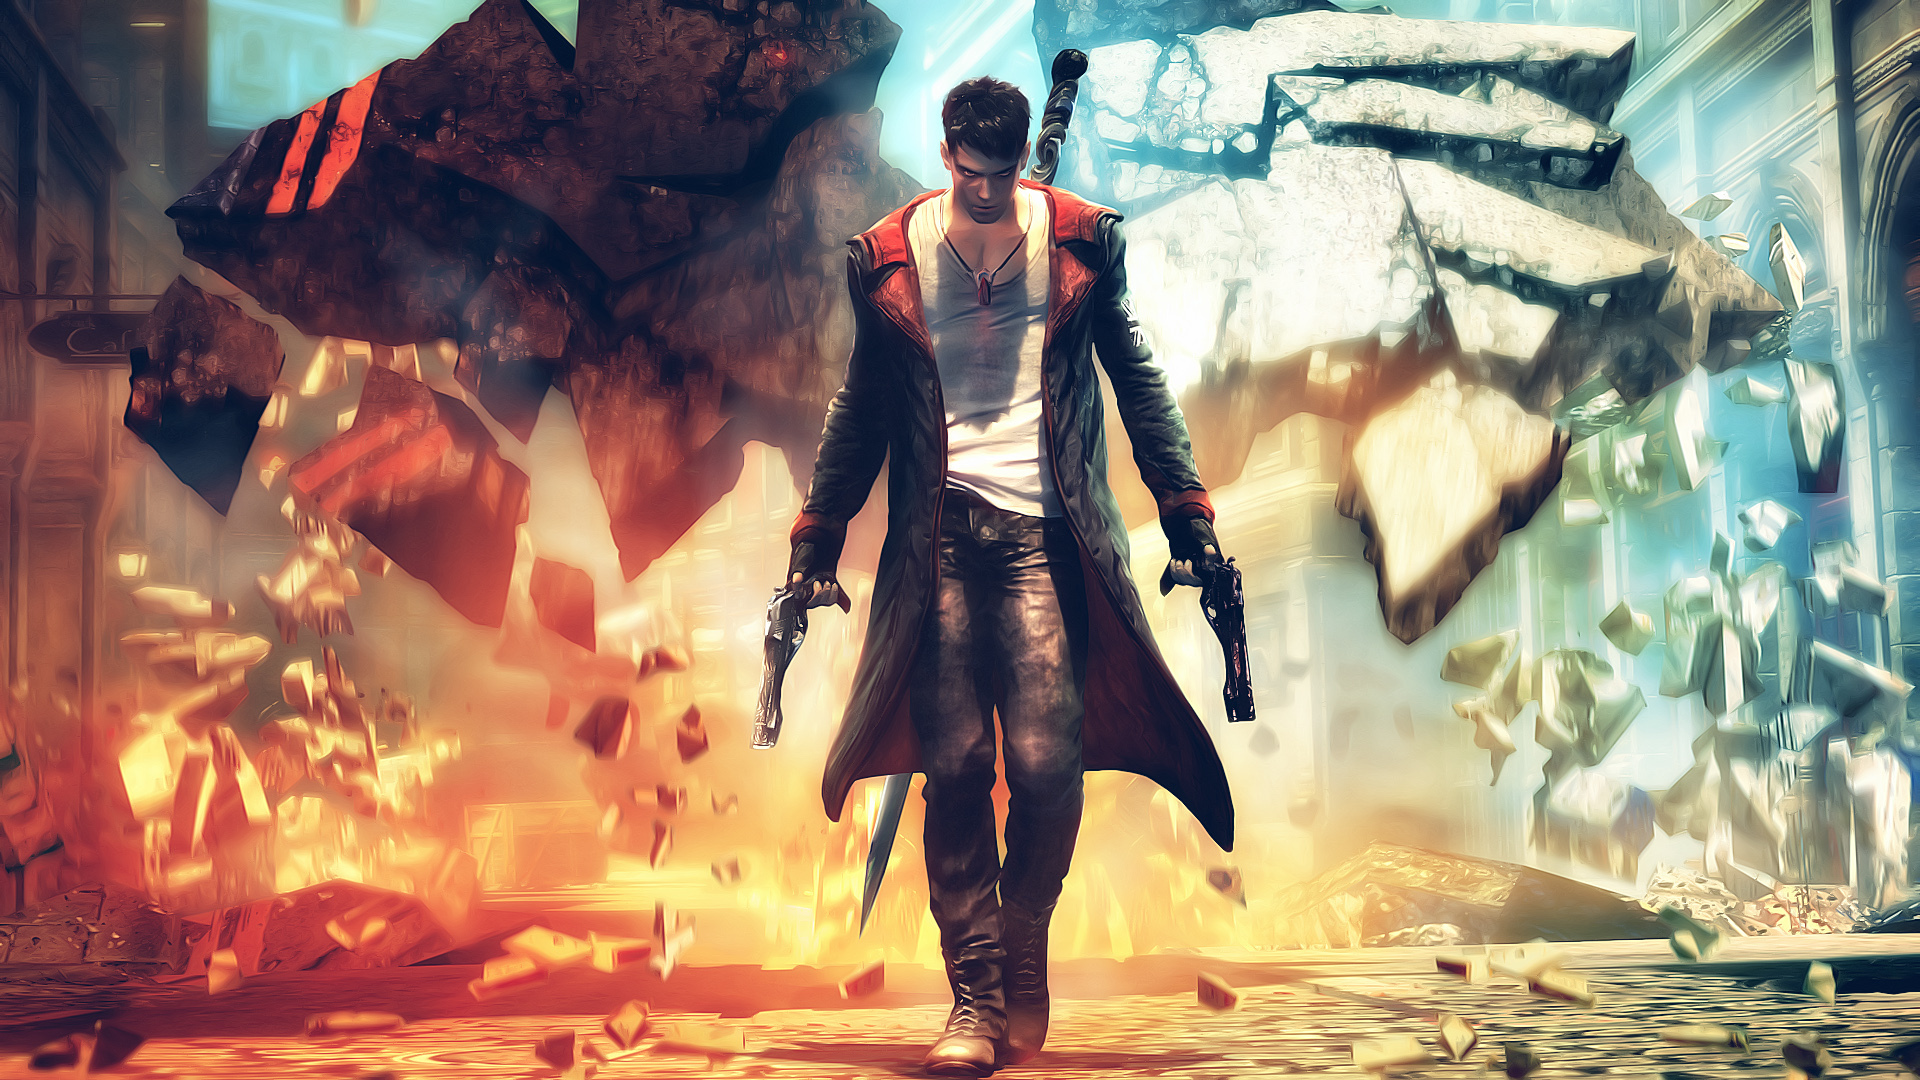 dmc: devil may cry, video game, devil may cry